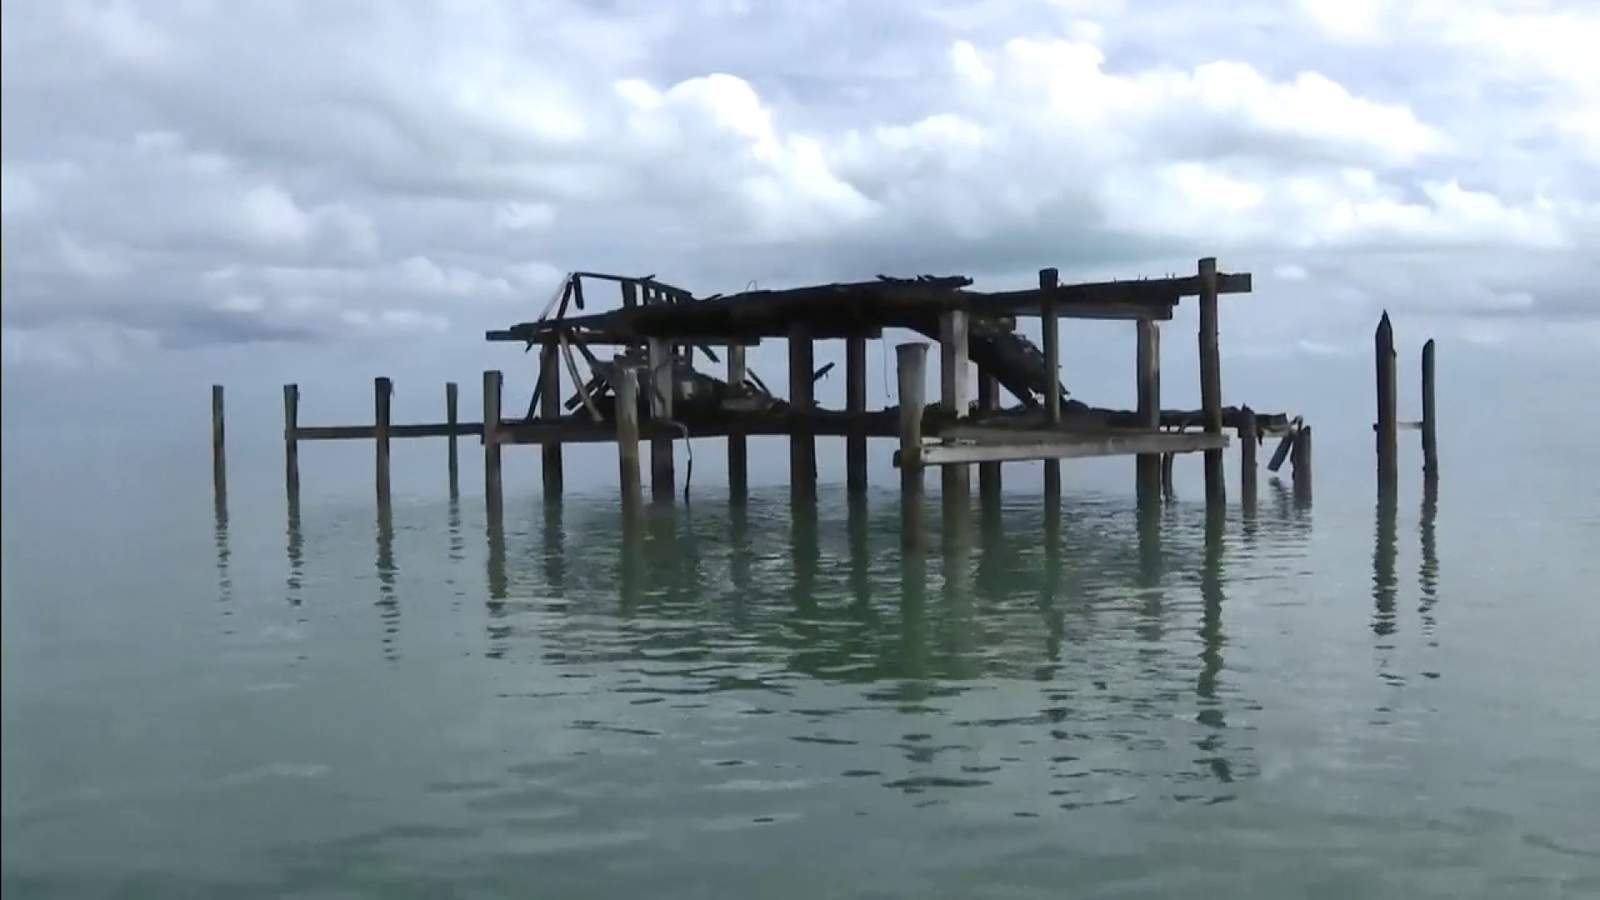 Leshaw Home destroyed in fire, leaving only 6 in Stiltsville